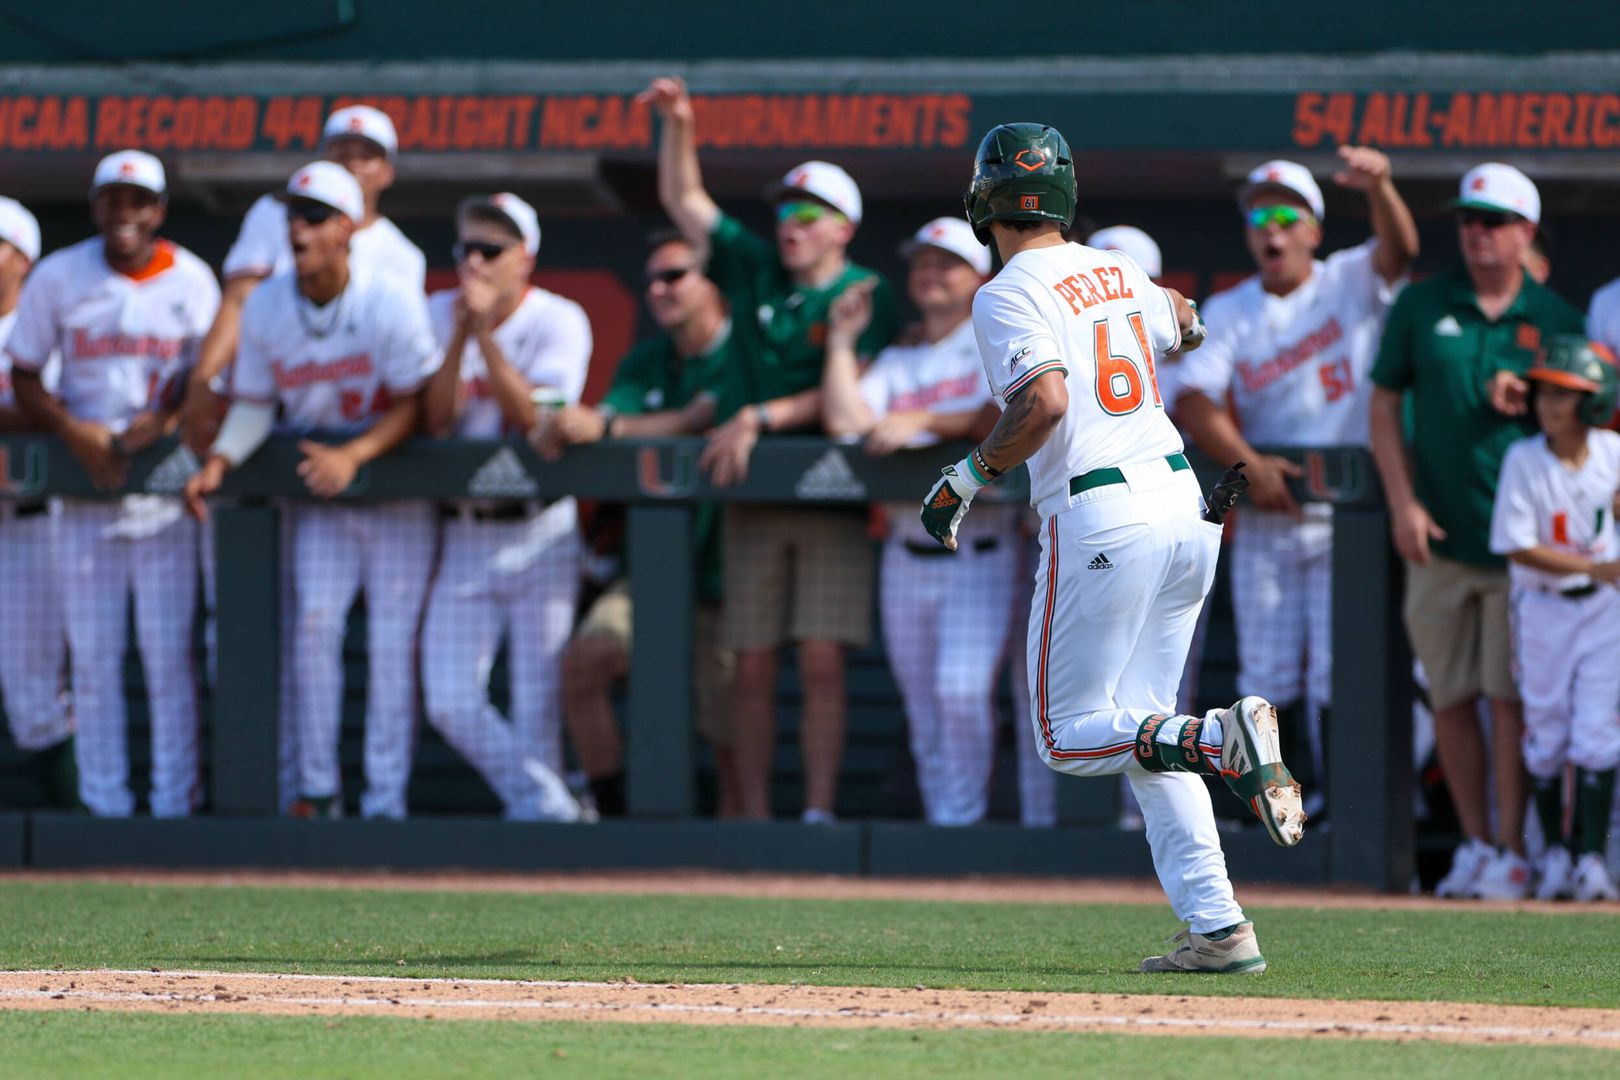 Canes Crush Crimson to Clinch Series